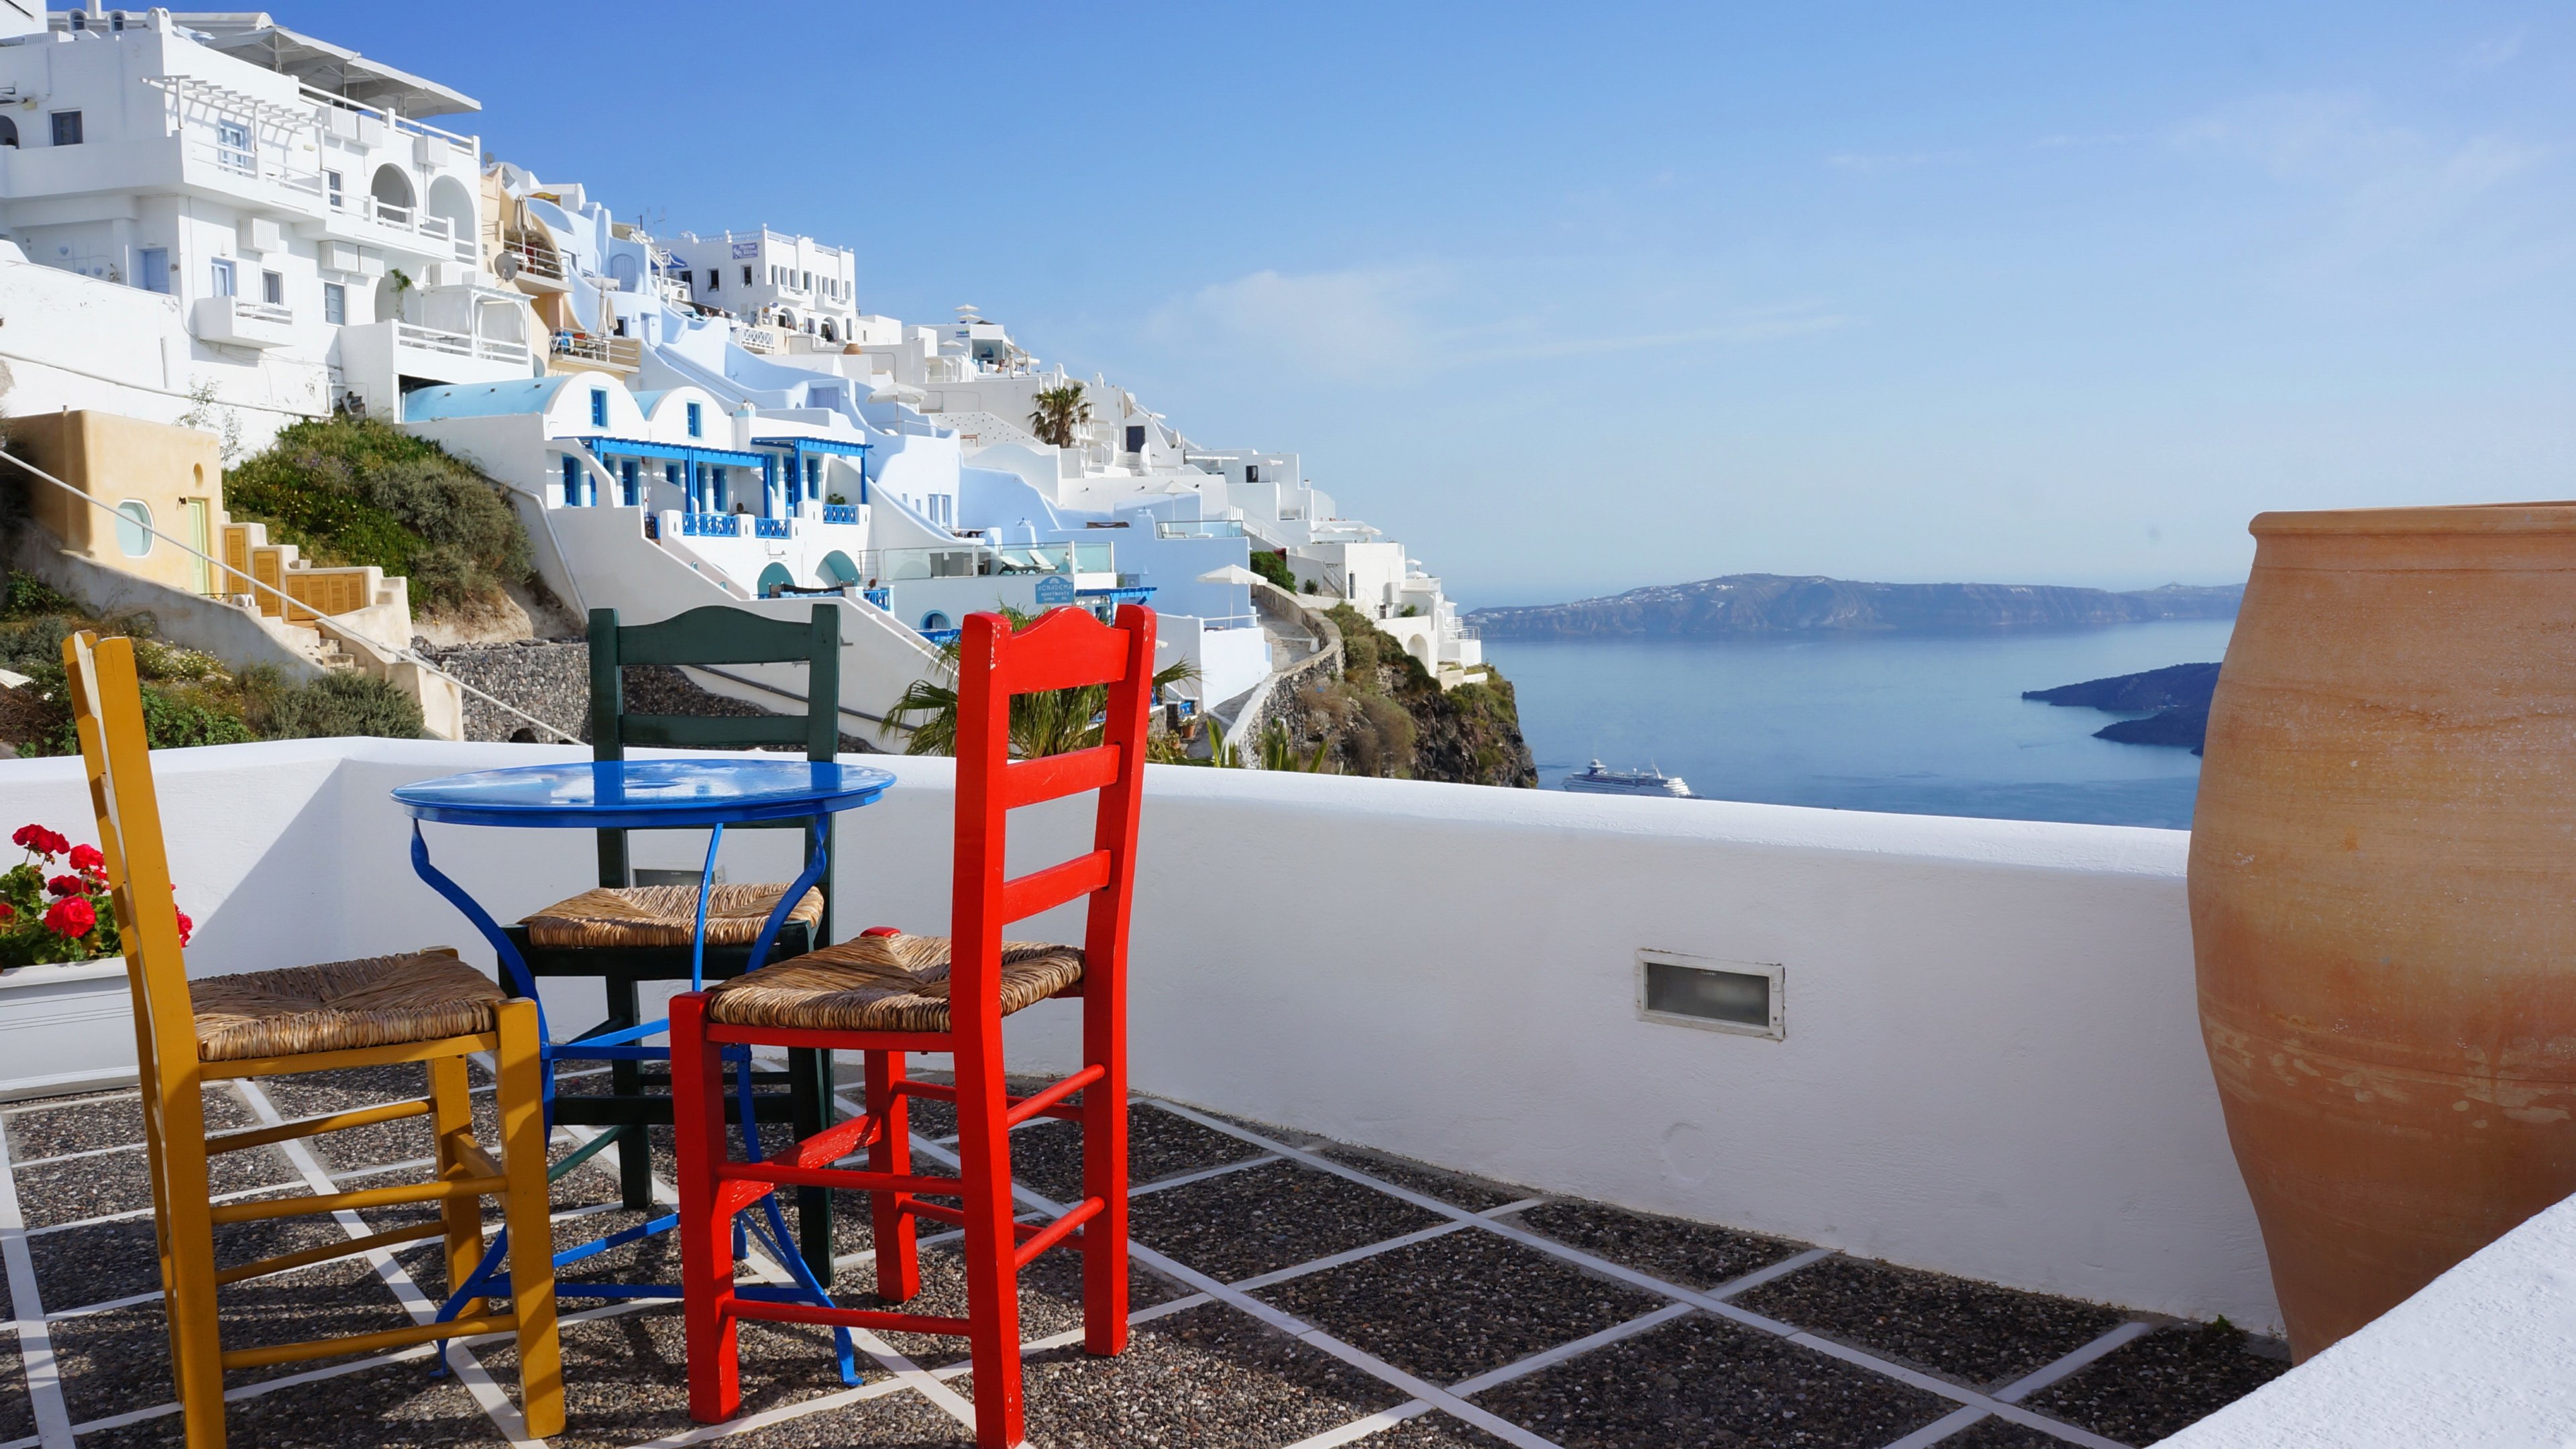 From Santorini Porch 4k Ultra HD Wallpaper Background Image